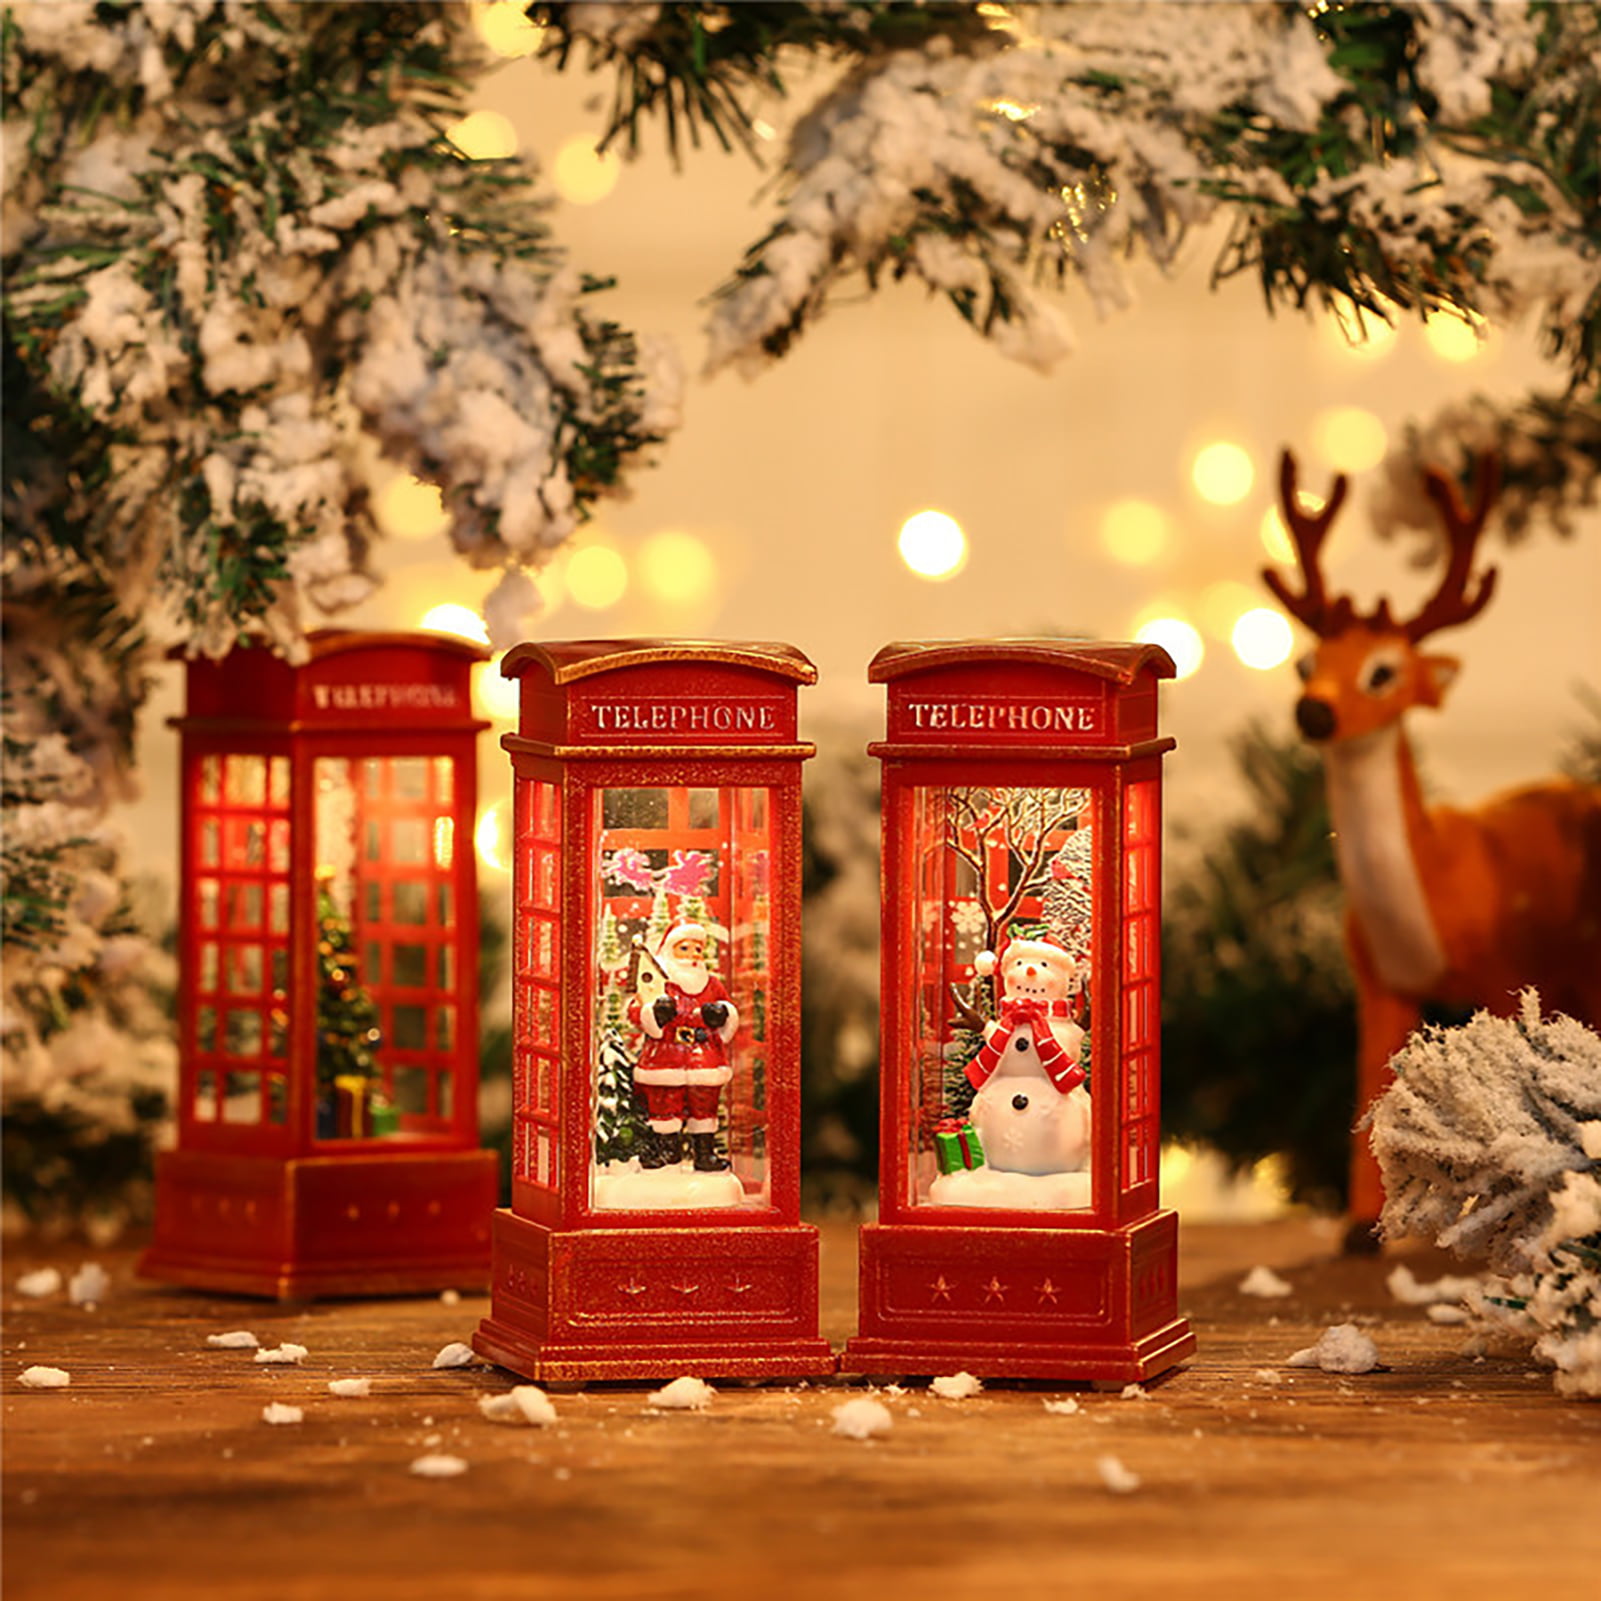  Arts and Crafts for Kids Ages 2-4 Girls Christmas Decoration  Christmas Telephone Booth Wind Lamp Decoration Home Props Red Light Phone  Booth 10ml DIY Crafts for Girls Ages 12-14 (B, One